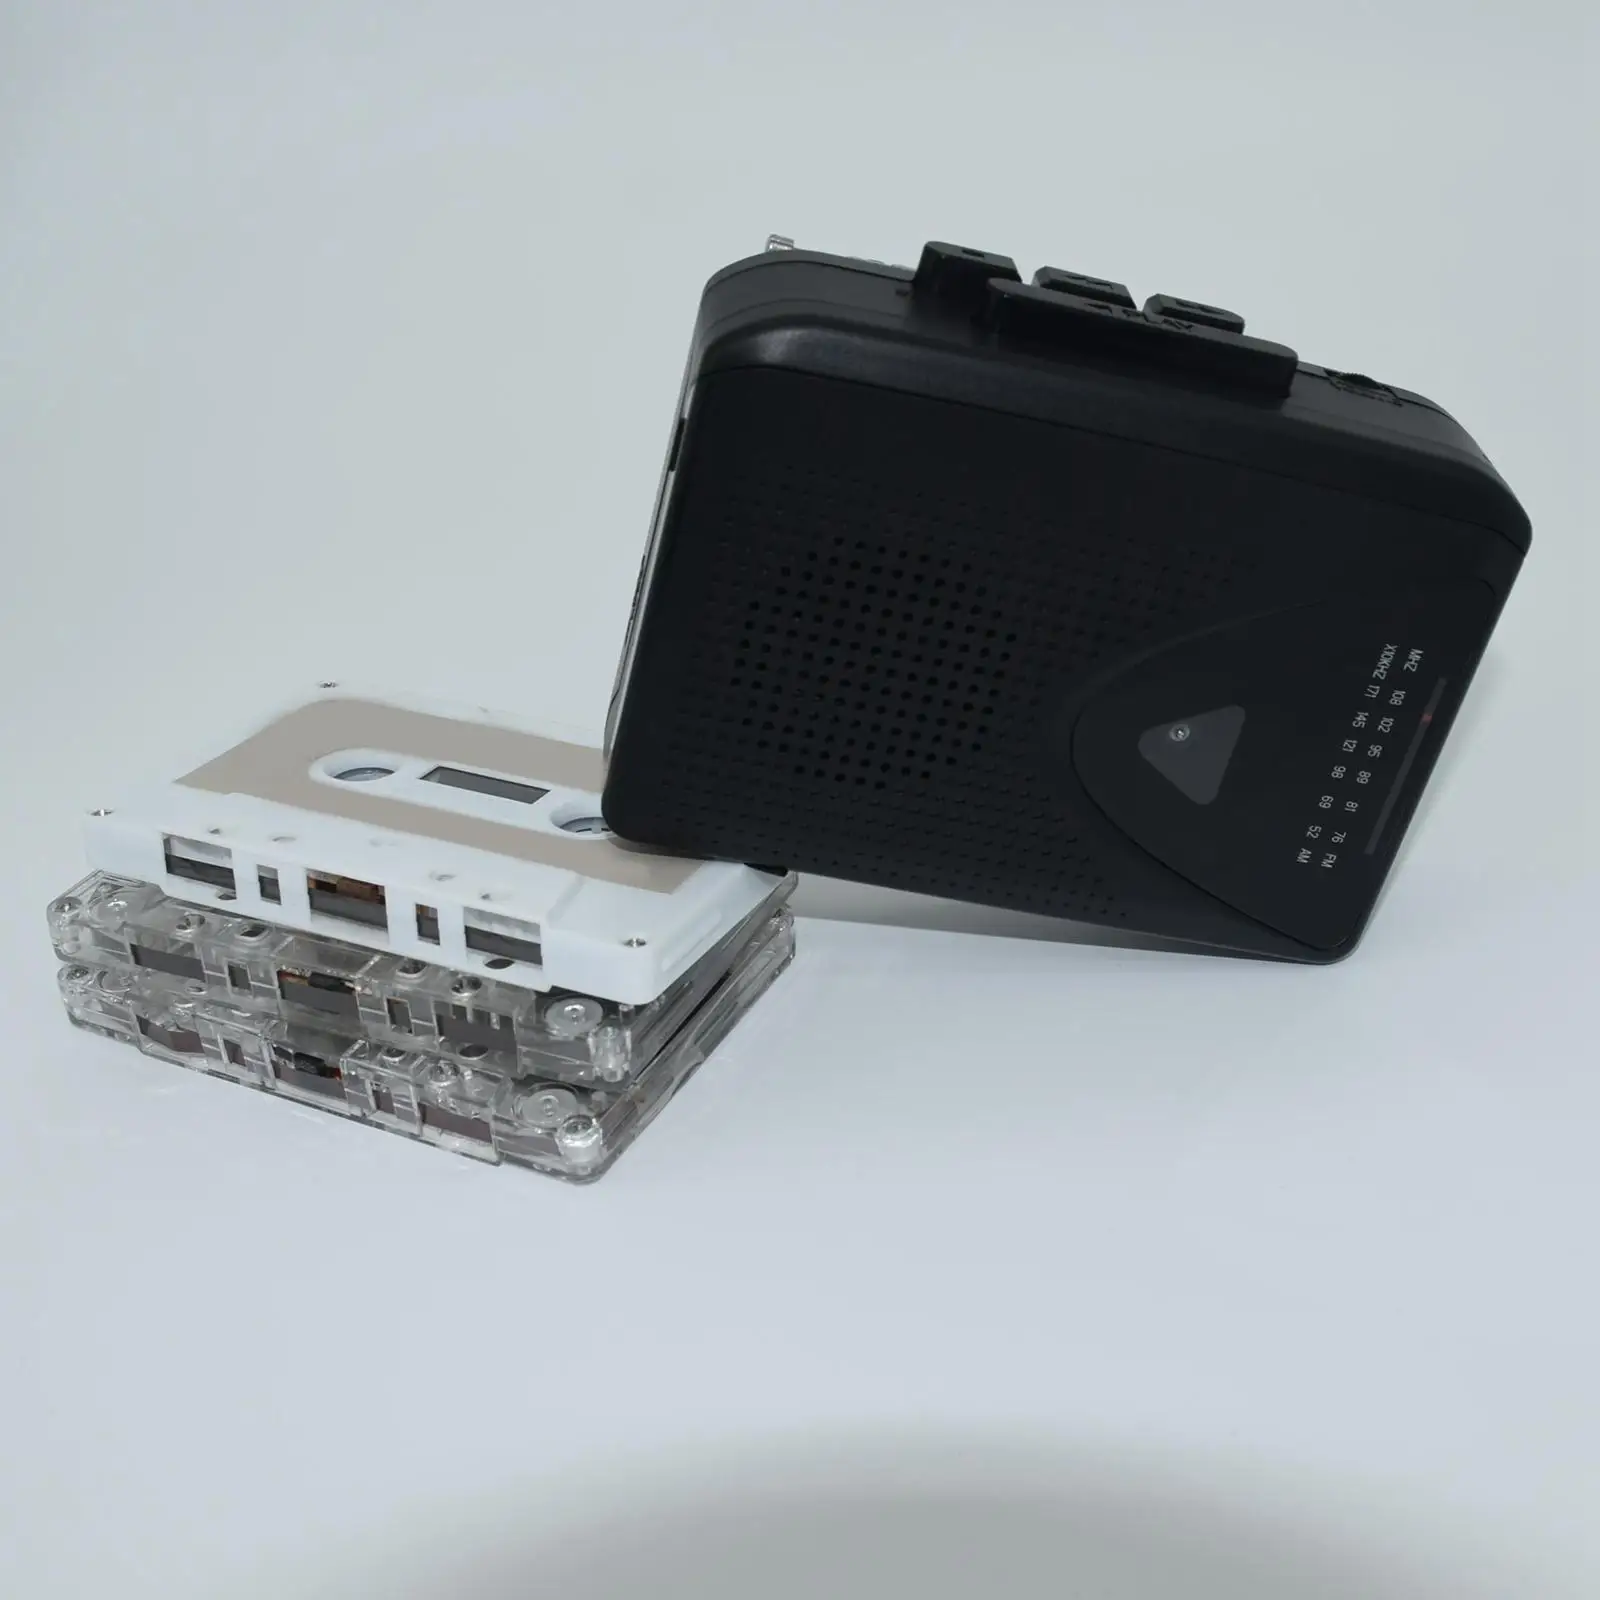 Cassette Recorder Vintage FM AM Tape Player Radio Compact Cassette Tapes Walkman Cassette Player for Radio Receiving Music News